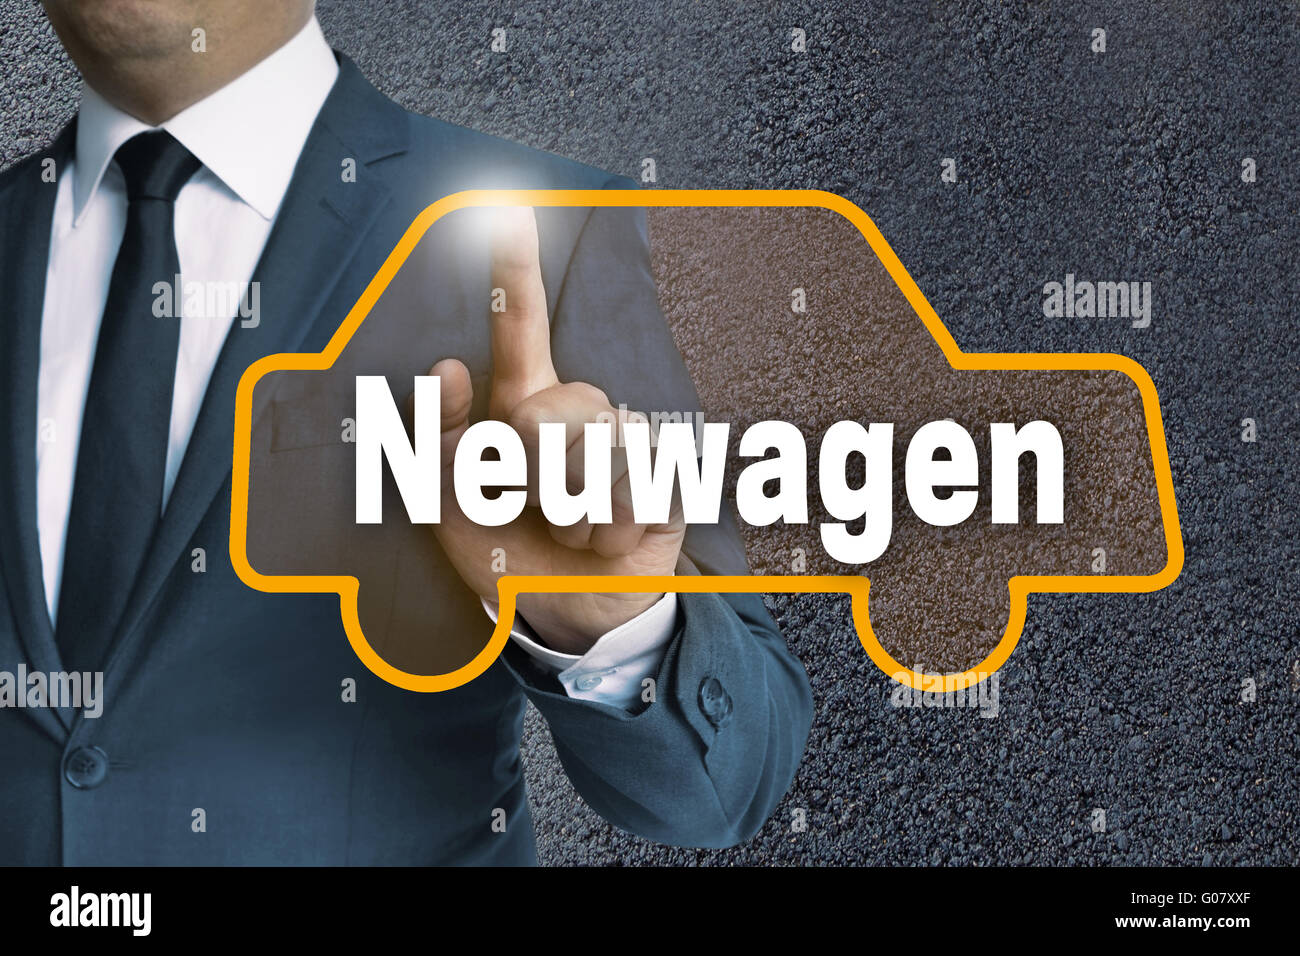 neuwagen (in german new car) auto touchscreen is operated by businessman concept. Stock Photo